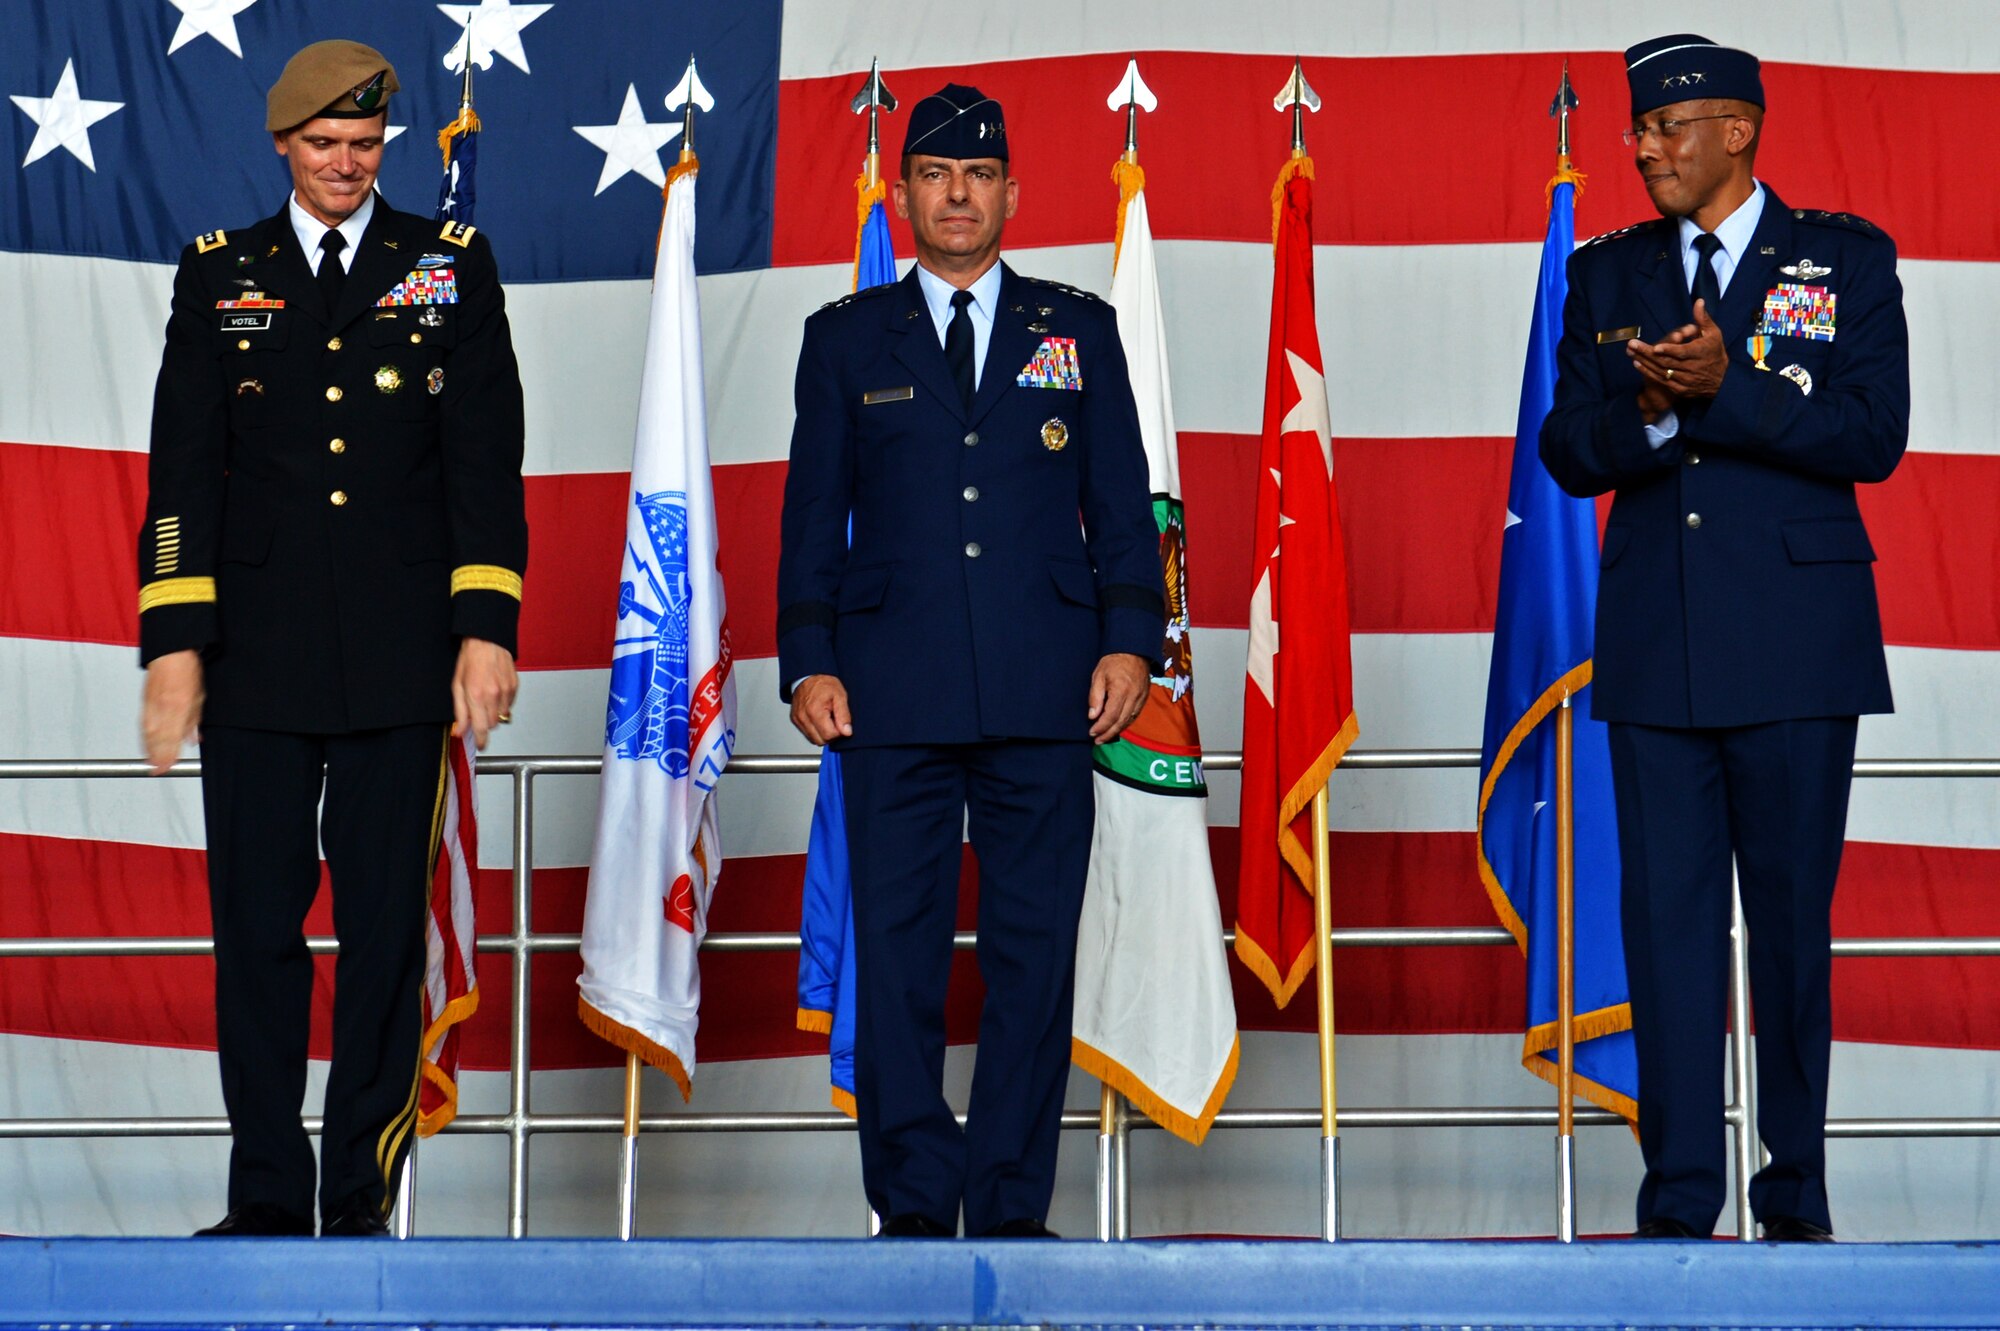 U.S. Army Gen. Joseph L. Votel, U.S. Central Command commander, stands with U.S. Air Force Lt. Gen. Jeffrey L. Harrigian., U.S. Air Forces Central Command commander, and  U.S. Air Force Lt. Gen. Charles Q. Brown Jr., U.S. Air Forces Central Command outgoing commander, during a change of command ceremony at Shaw Air Force Base, S.C., July 22, 2016. Outgoing and incoming commanders exchange a unit’s guidon to symbolize relinquishment and assumption of command. (U.S. Air Force photo by Airman 1st Class Christopher Maldonado/Released)